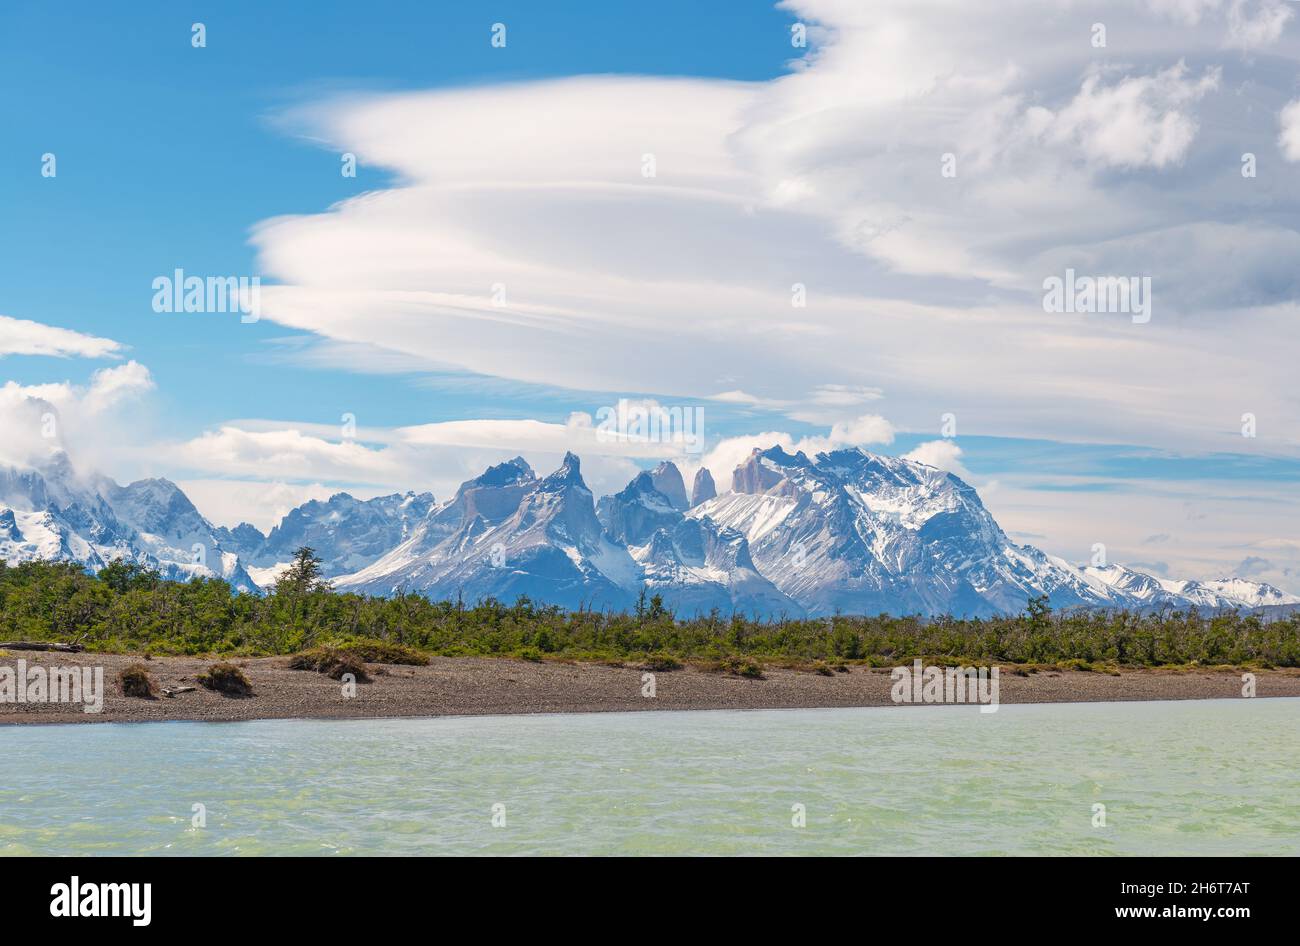 Cuernos and Torres del Paine Andes peaks with lenticular cloudsalong Serrano river, Torres del Paine national park, Patagonia, Chile. Stock Photo